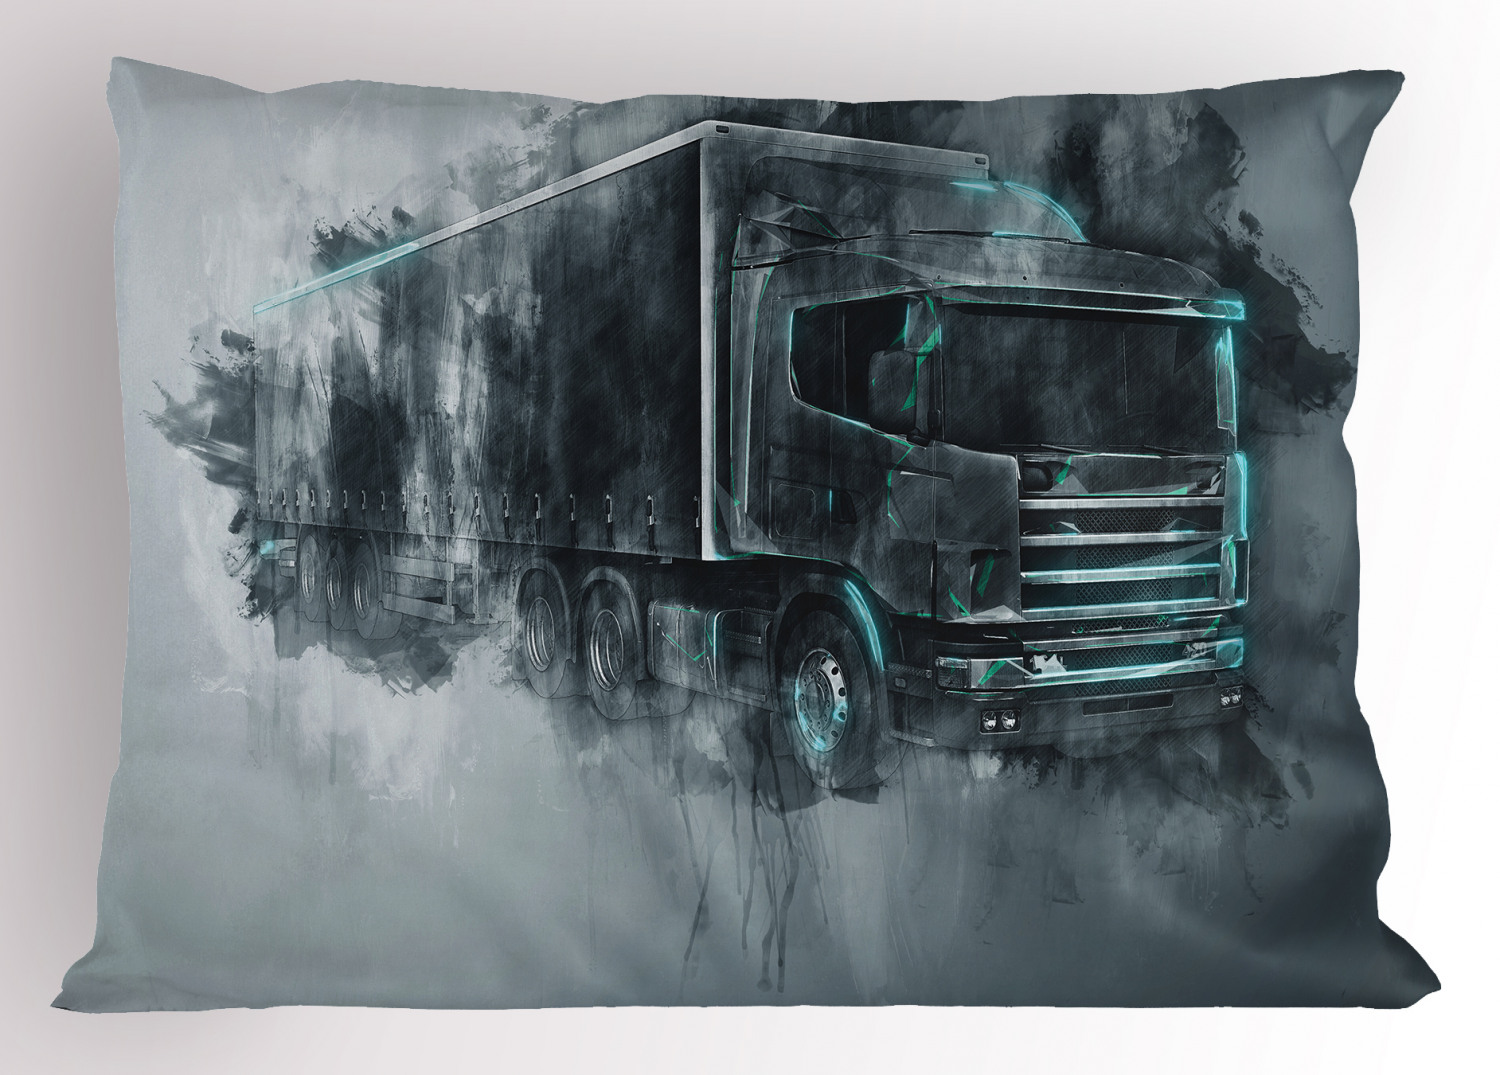 Details about   Truck Pillow Sham Decorative Pillowcase 3 Sizes Available for Bedroom Decor 